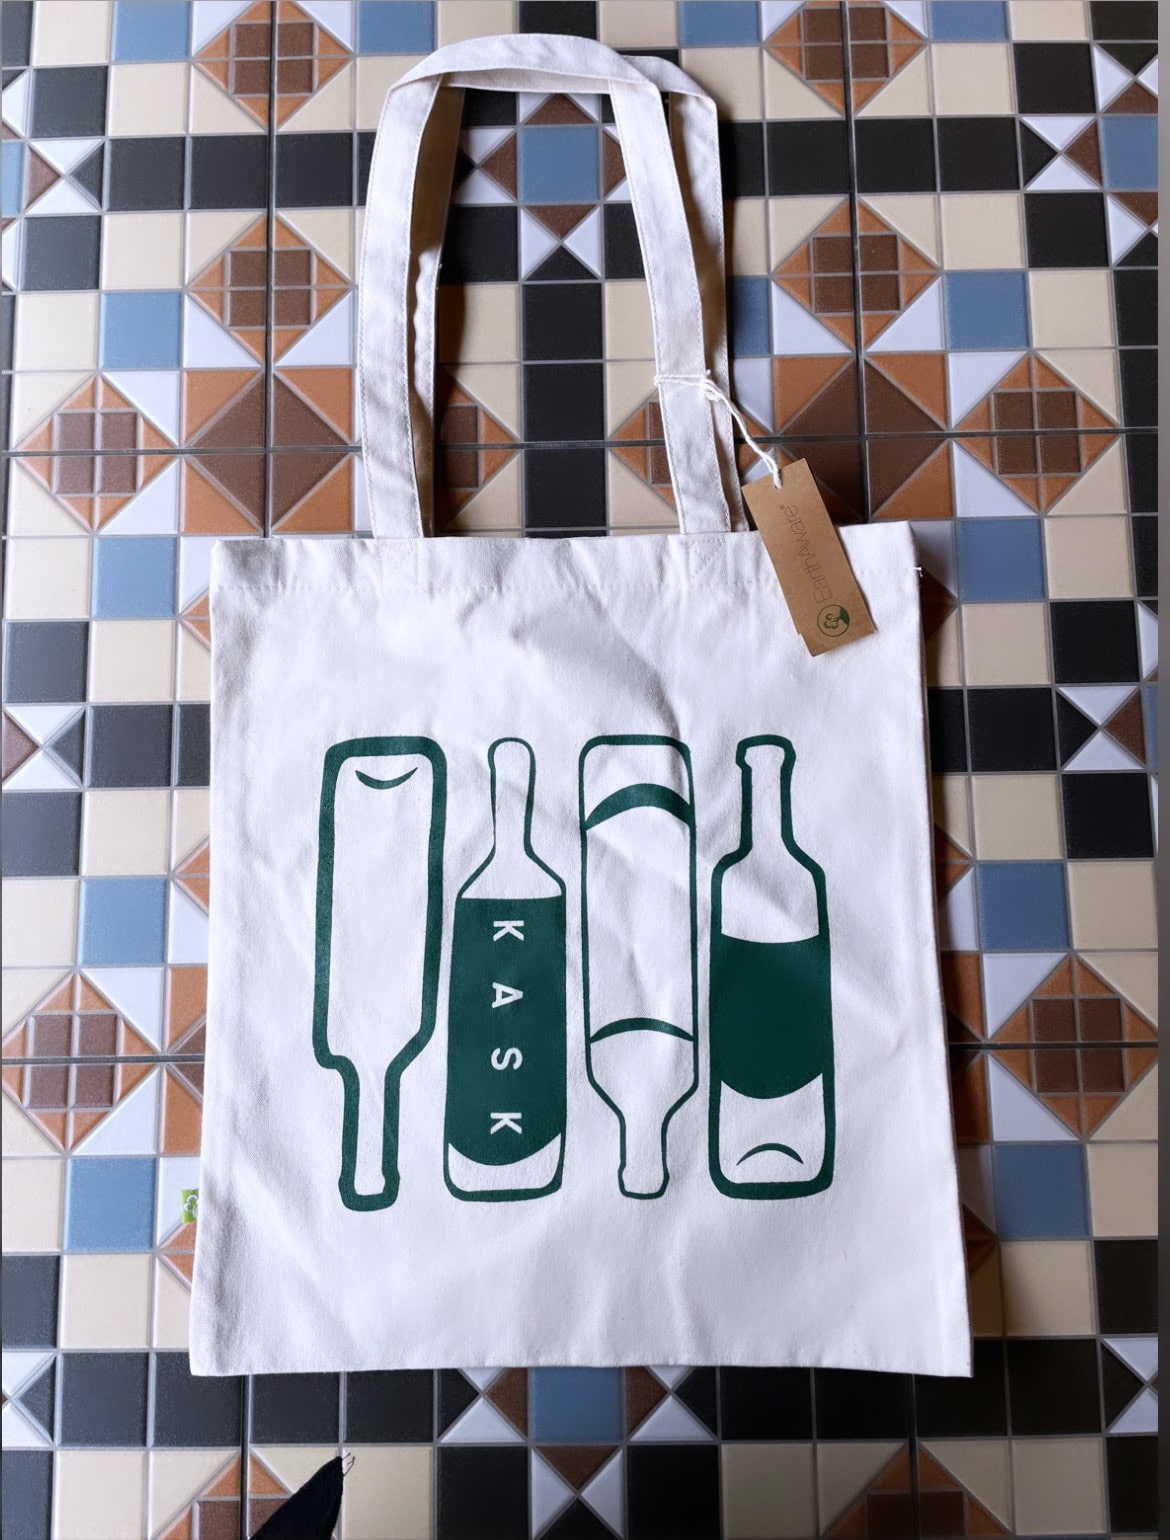 Go and Do tote bag – Kasia Winery, LLC